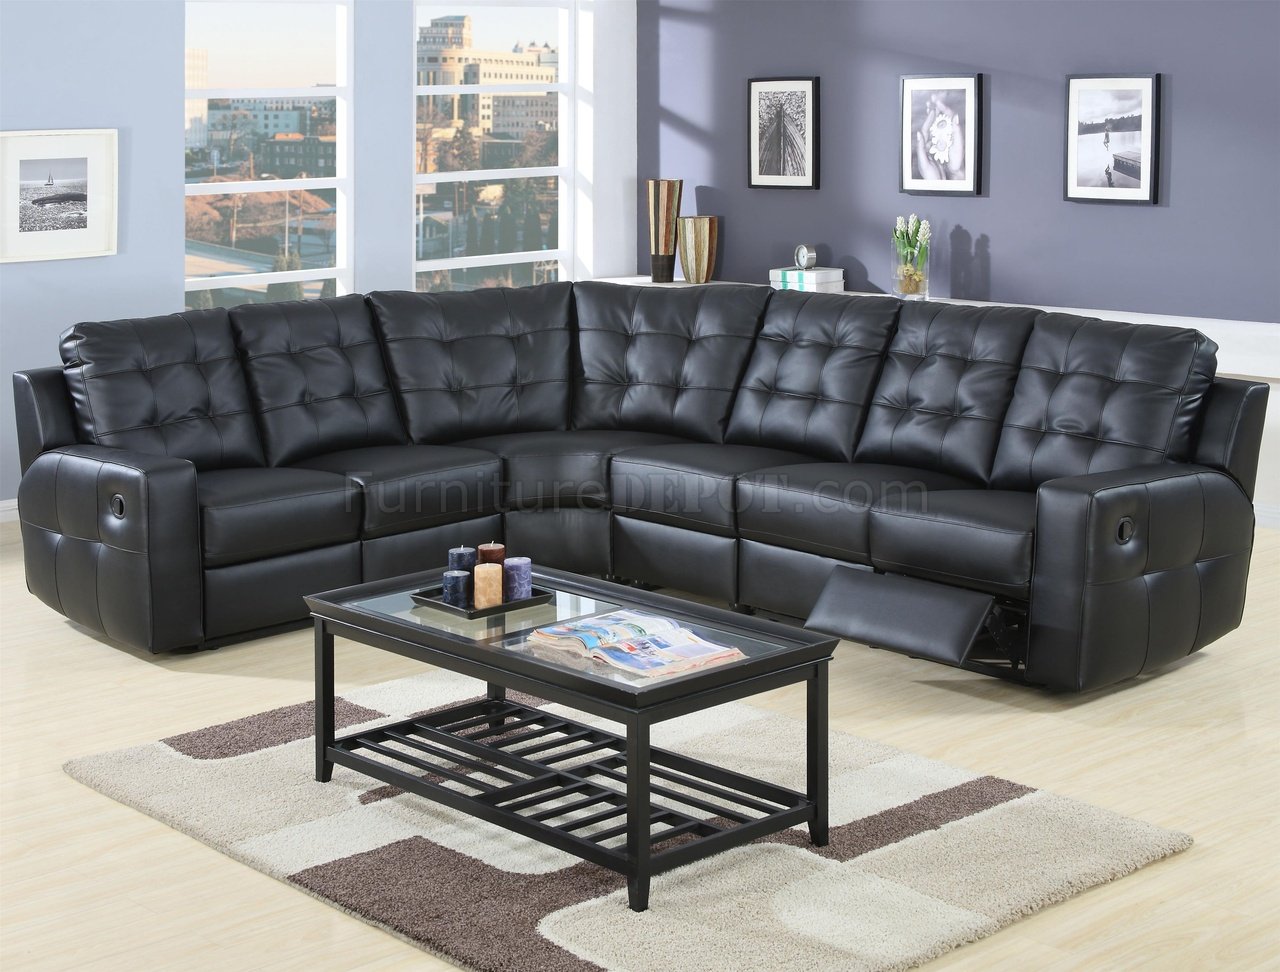 black leather 5 seat recliner sectional sofa